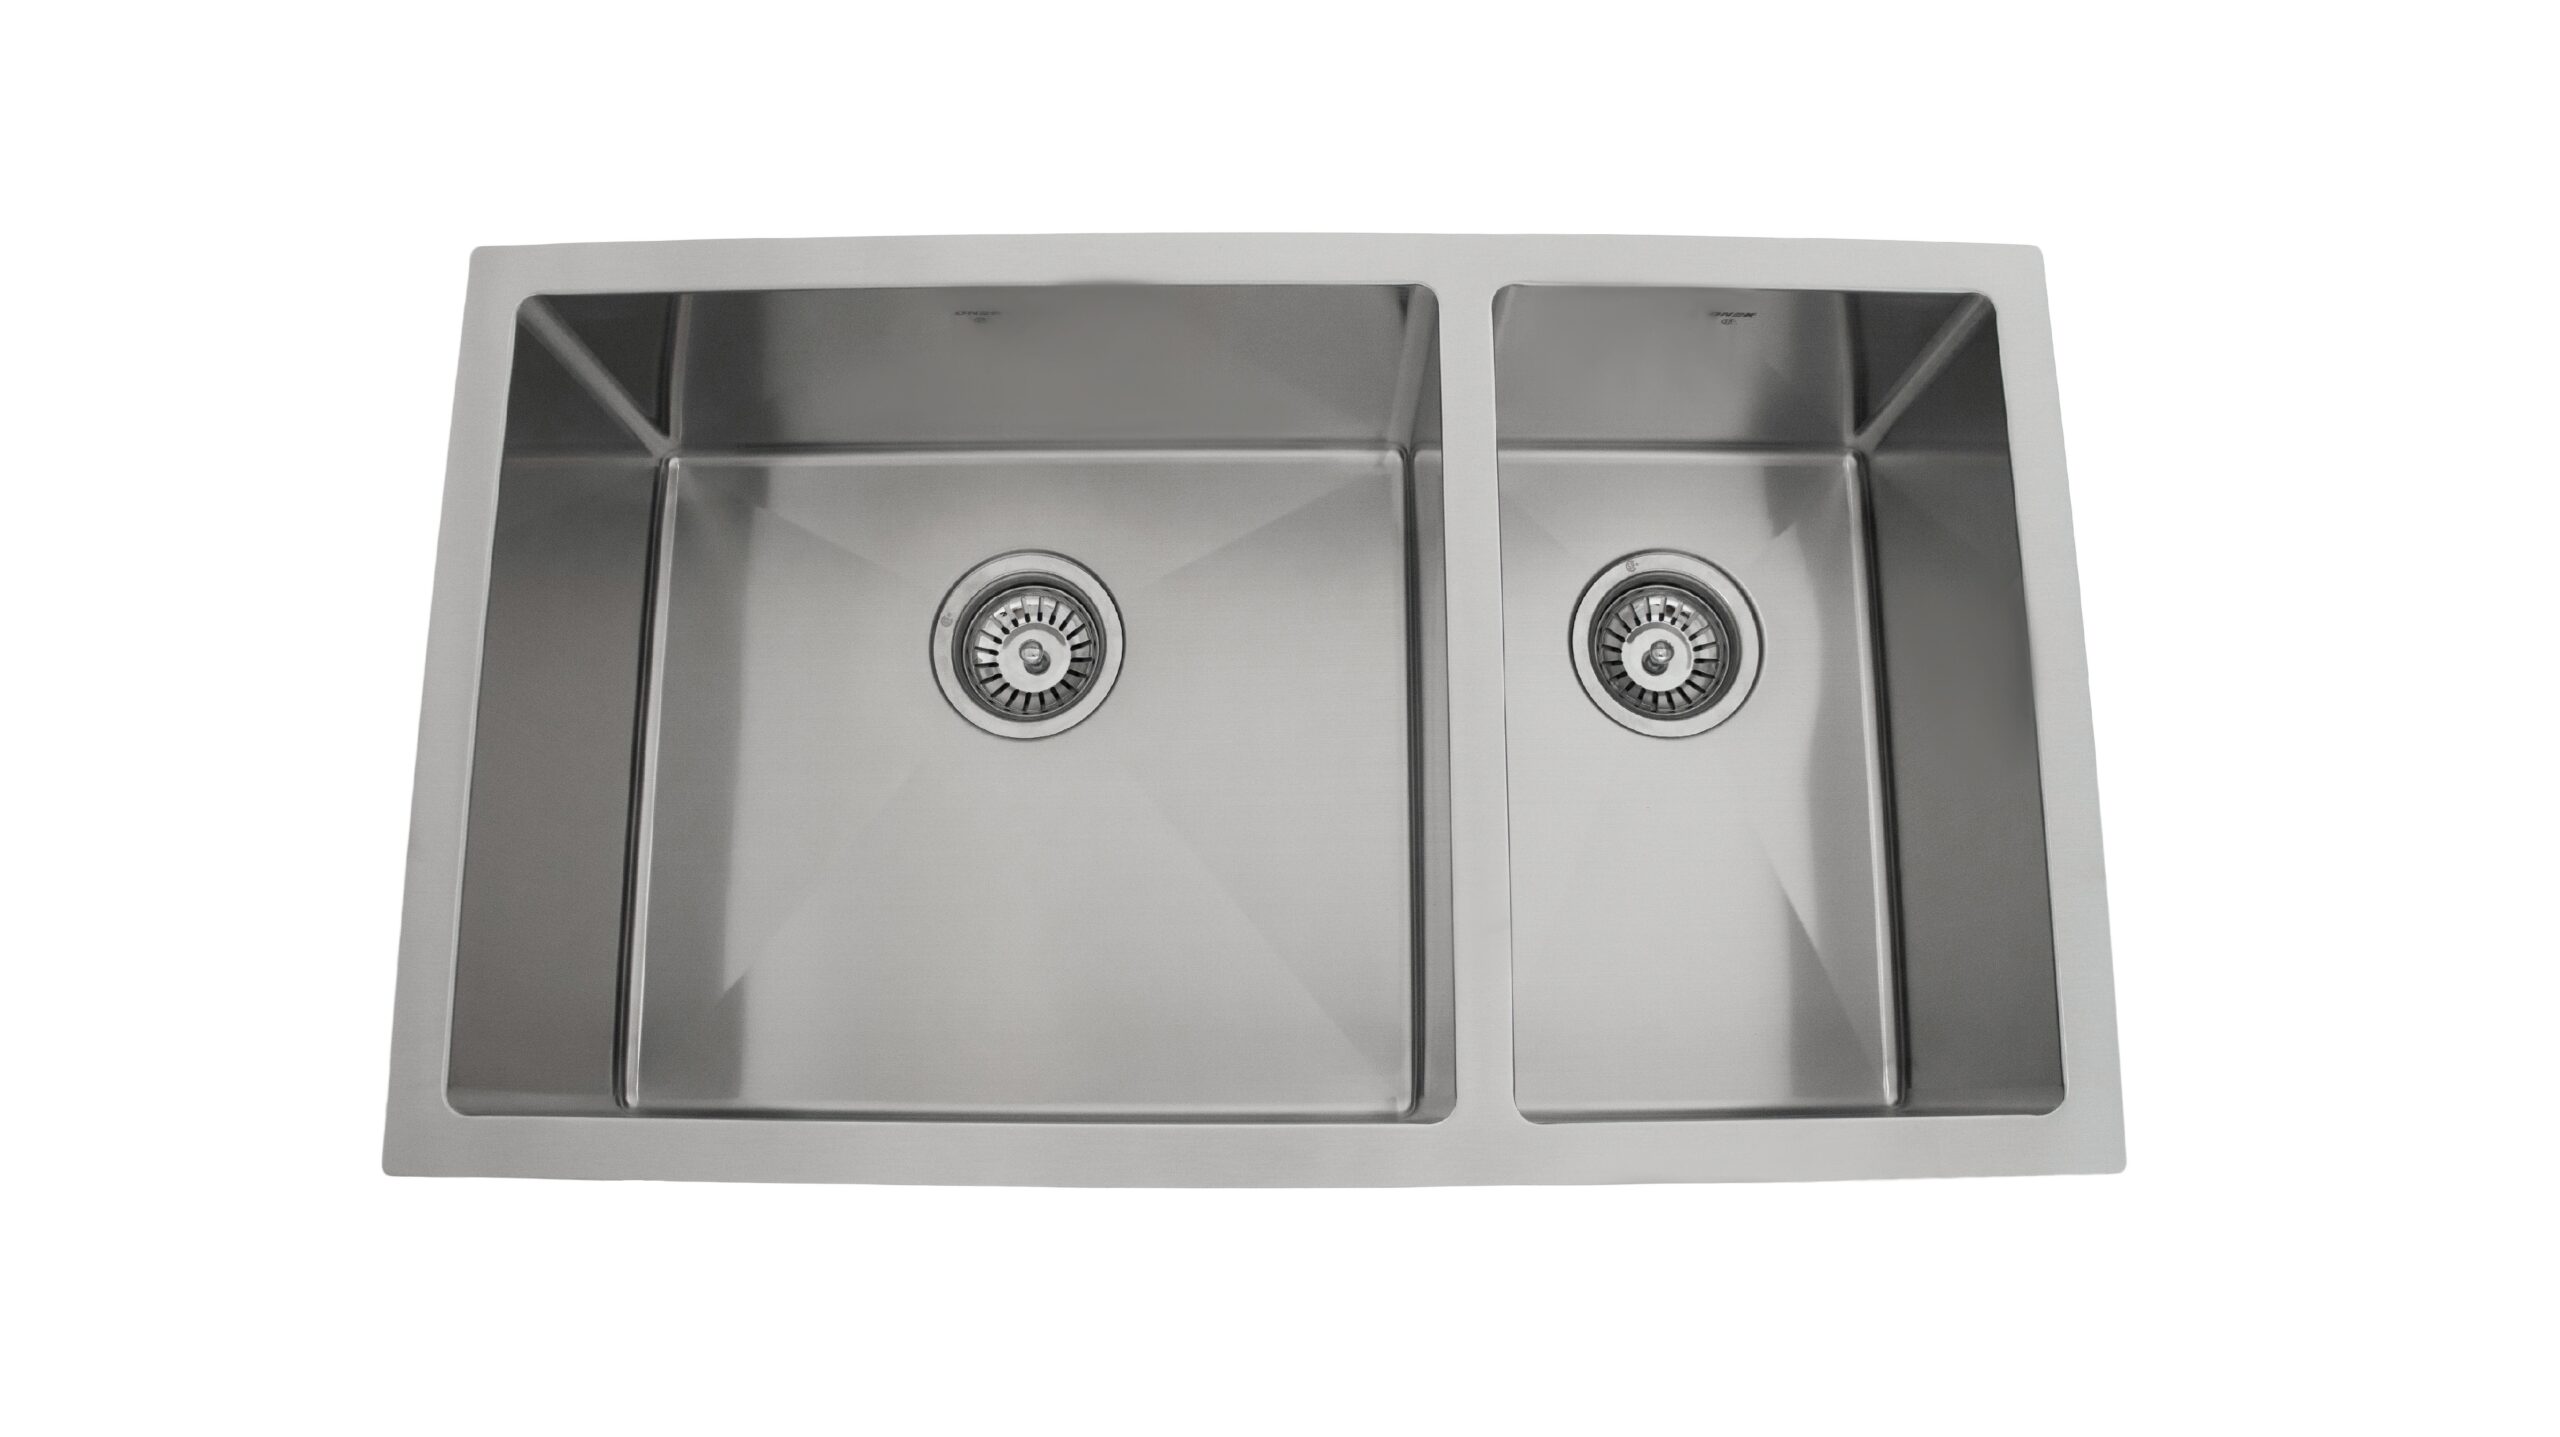 OU3218 SQR U, Uneven, Double Bowl, Stainless Steel, Designer Collection, Onex Enterprises, Sinks in Canada